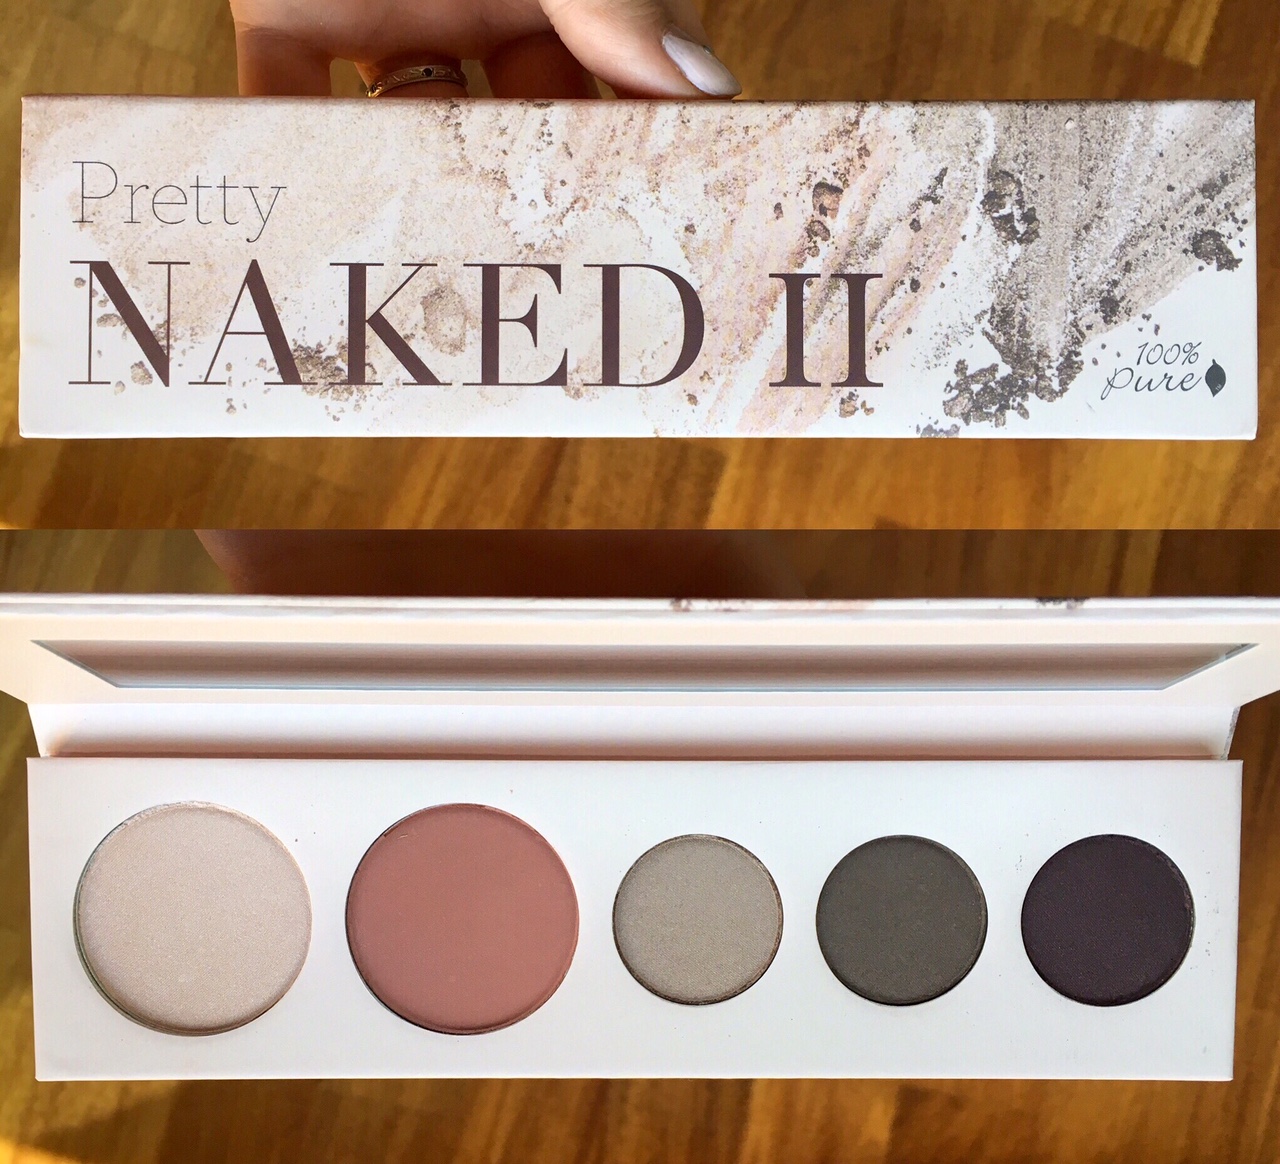 100 Percent Pure Naked II makeup palette